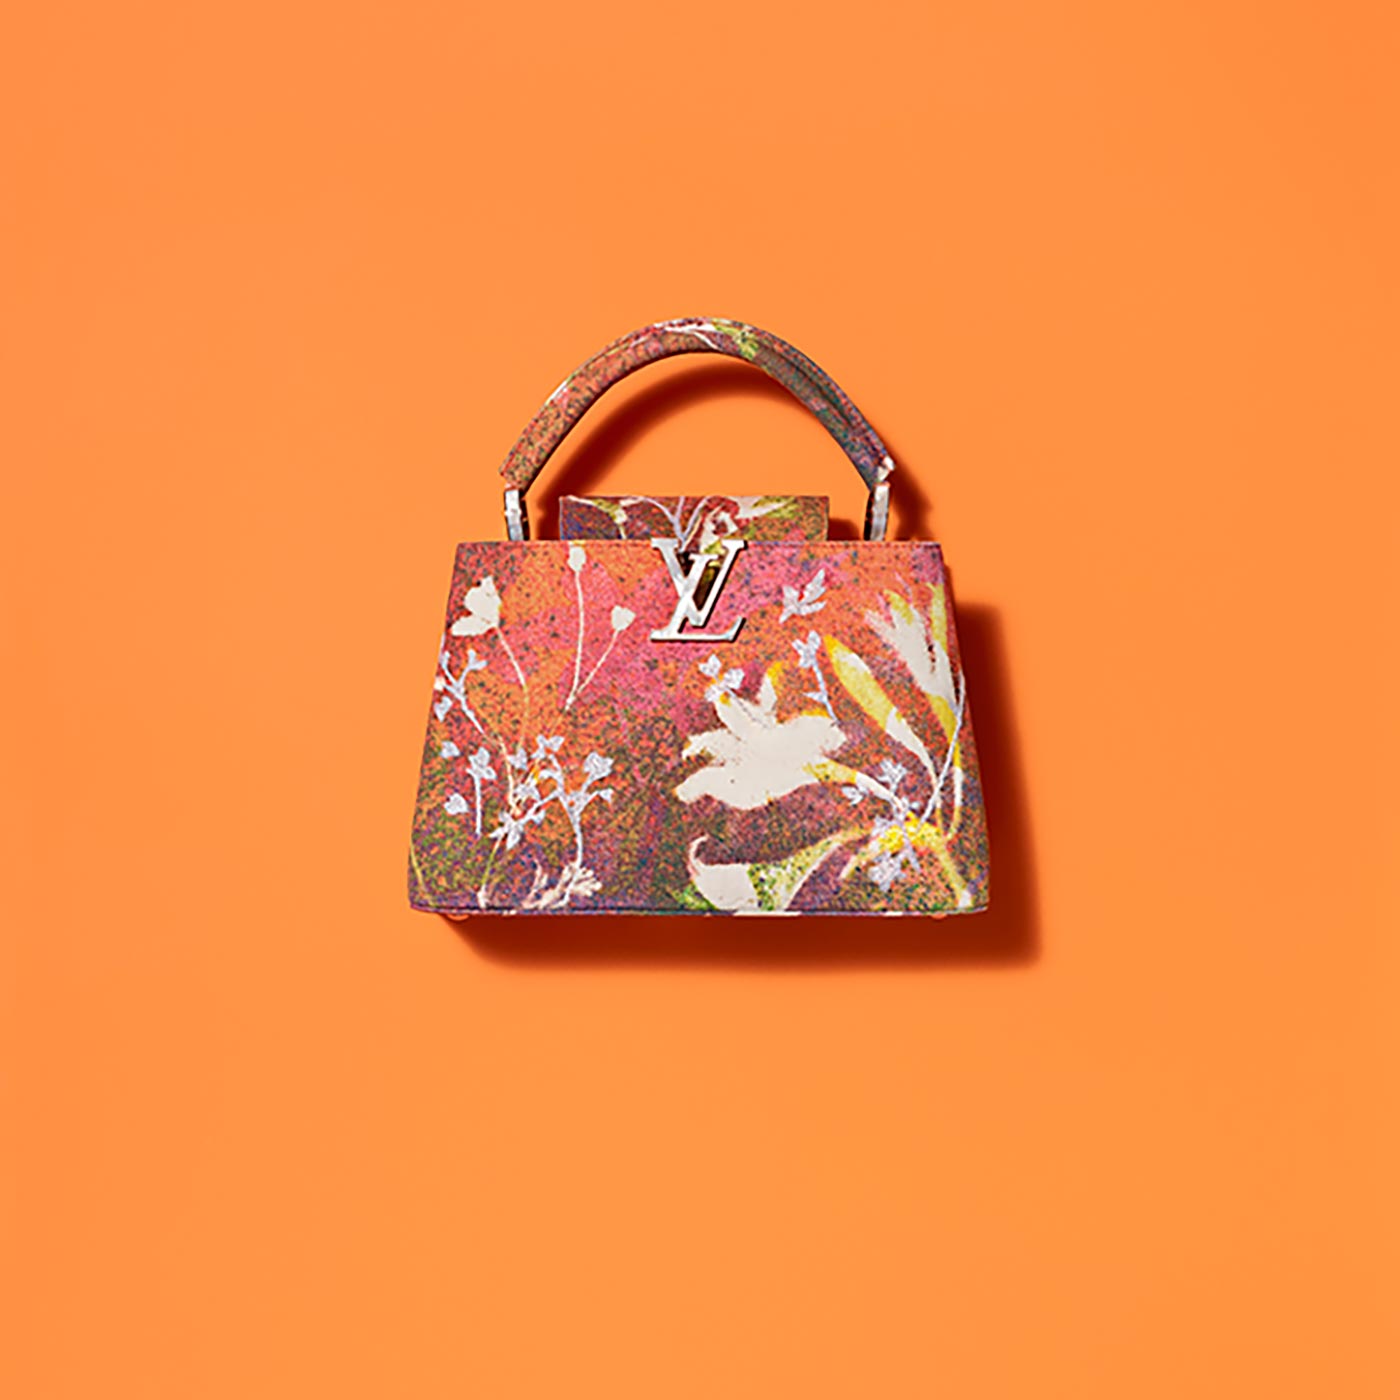 Louis Vuitton #ArtyCapucines Collection - BagAddicts Anonymous